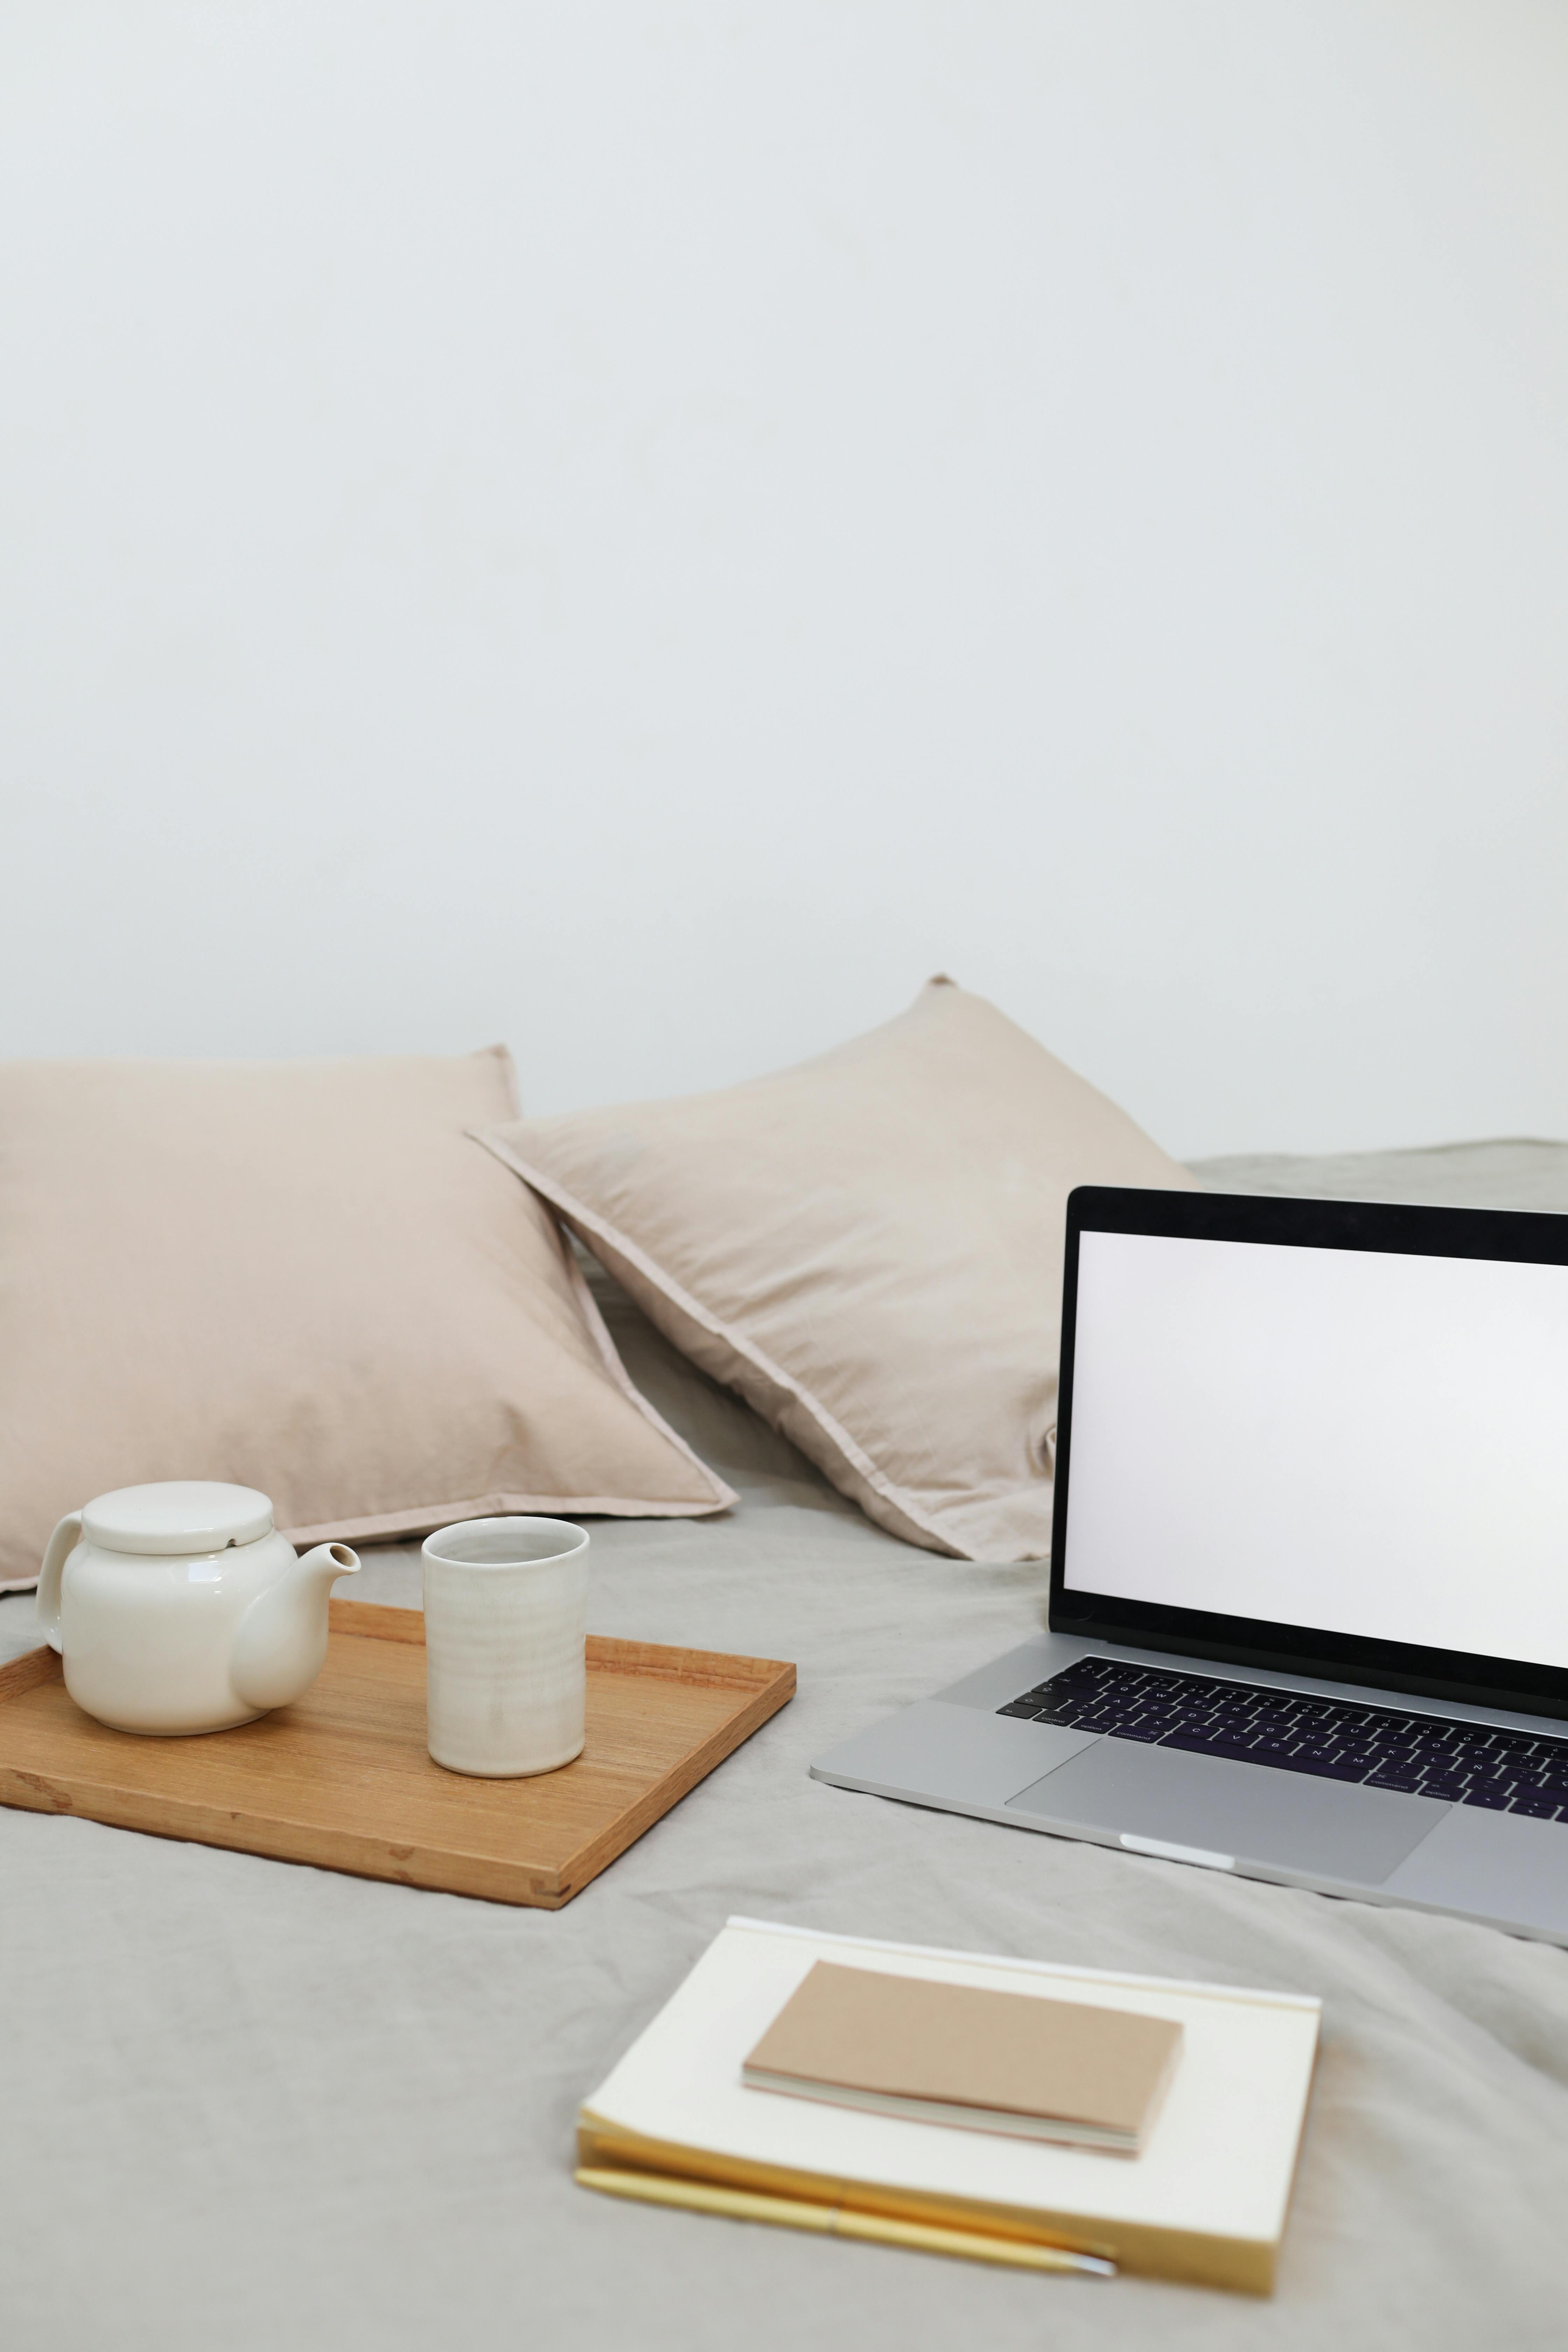 jotter and laptop arranged on bed near tray with tea set